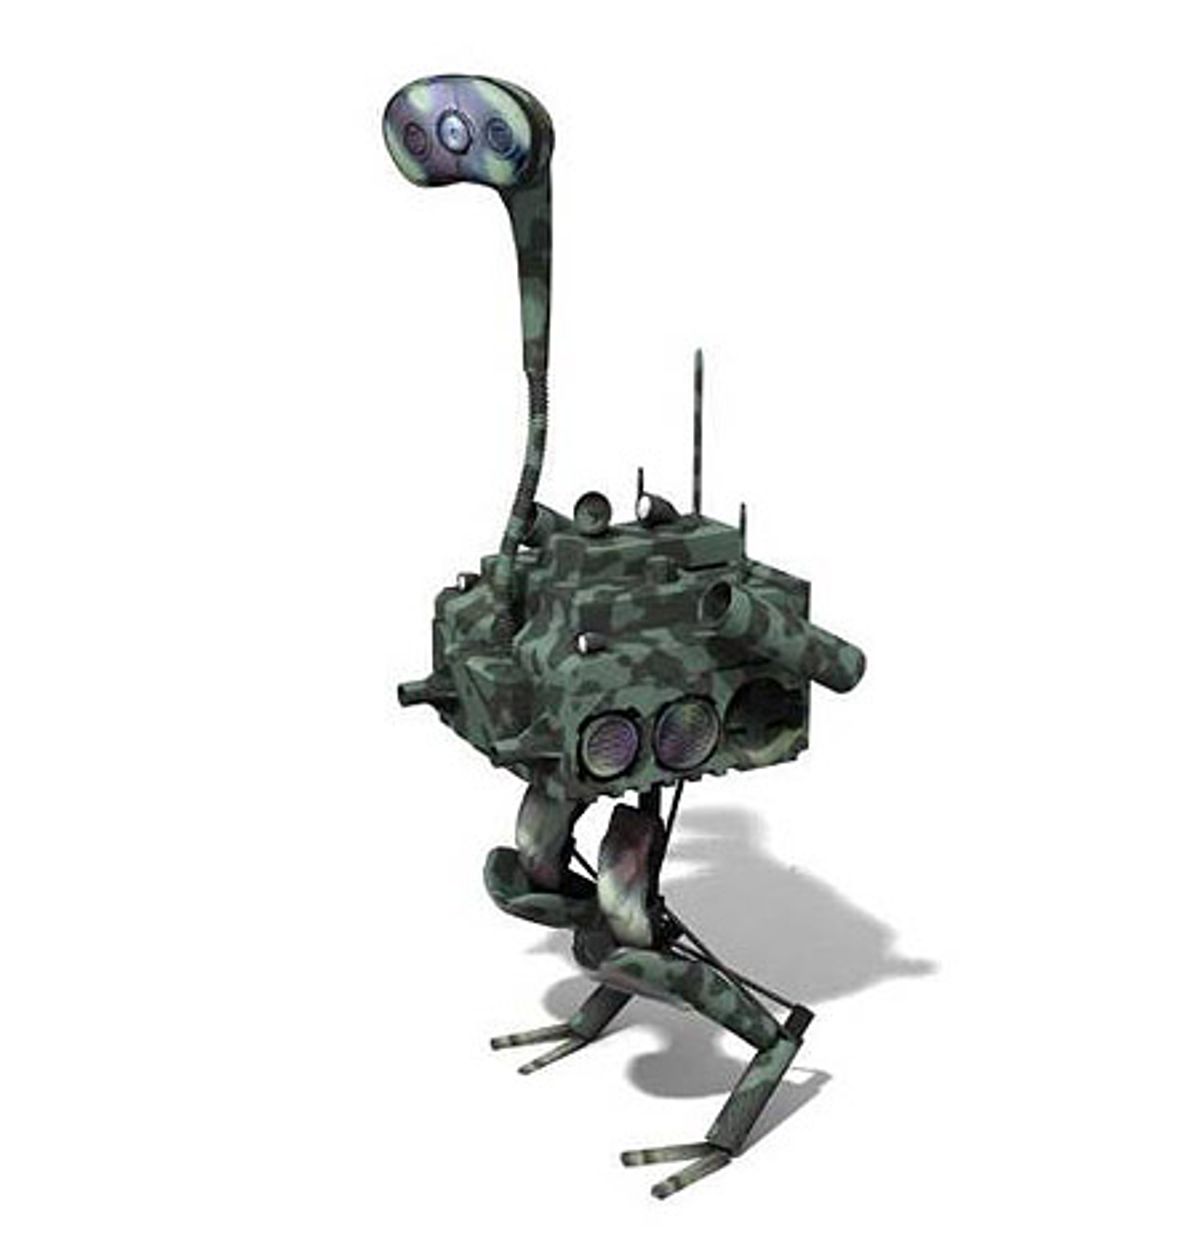 This Is What DARPA's Robot Ostrich Will Look Like